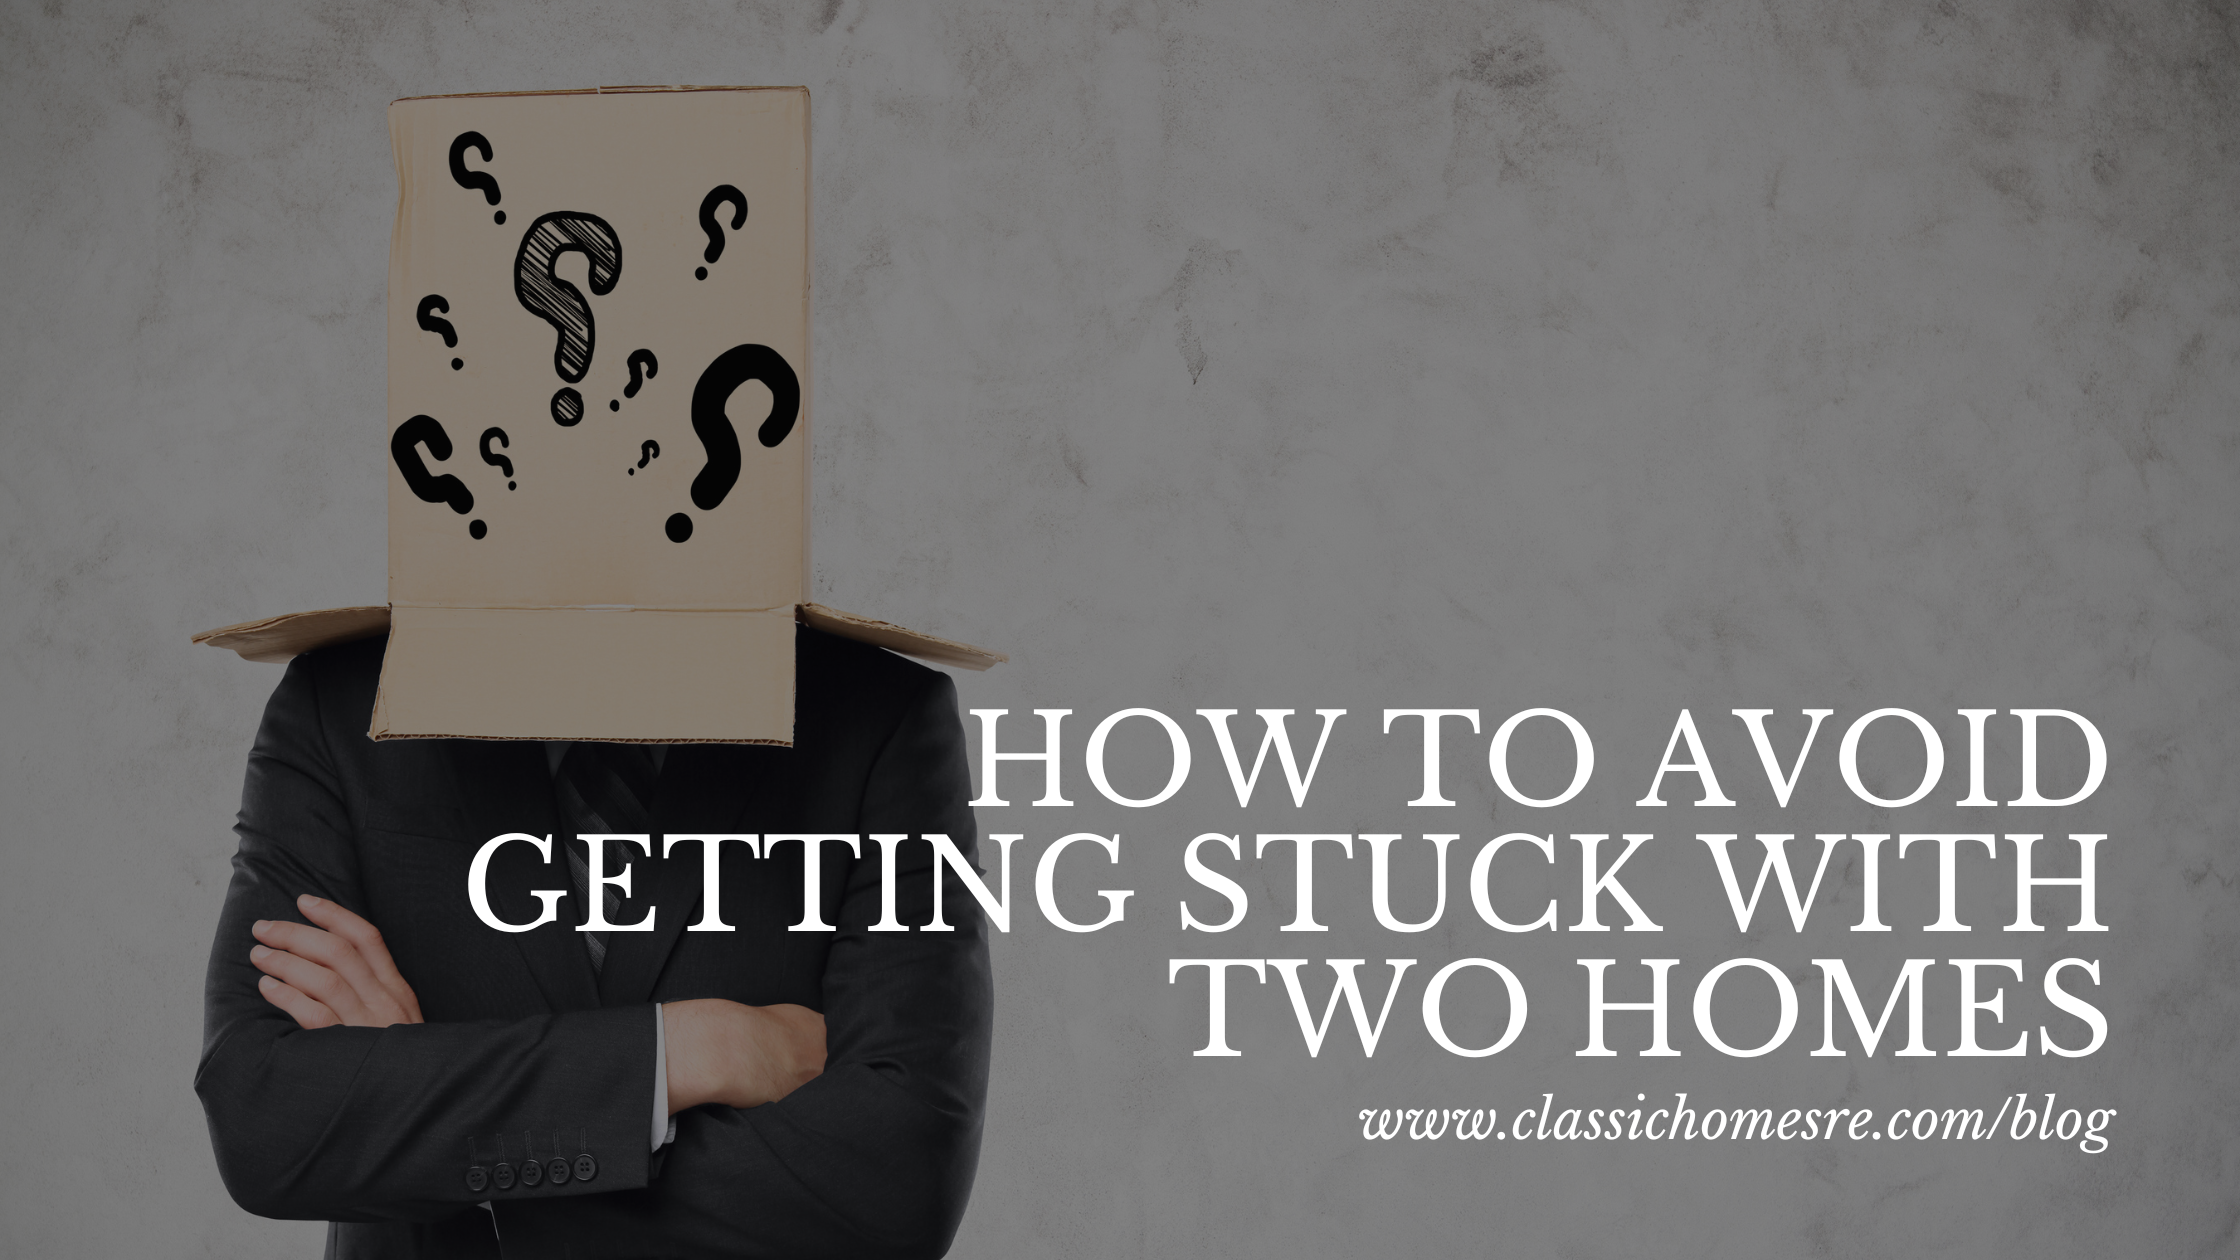 How to Avoid Getting Stuck With Two Homes